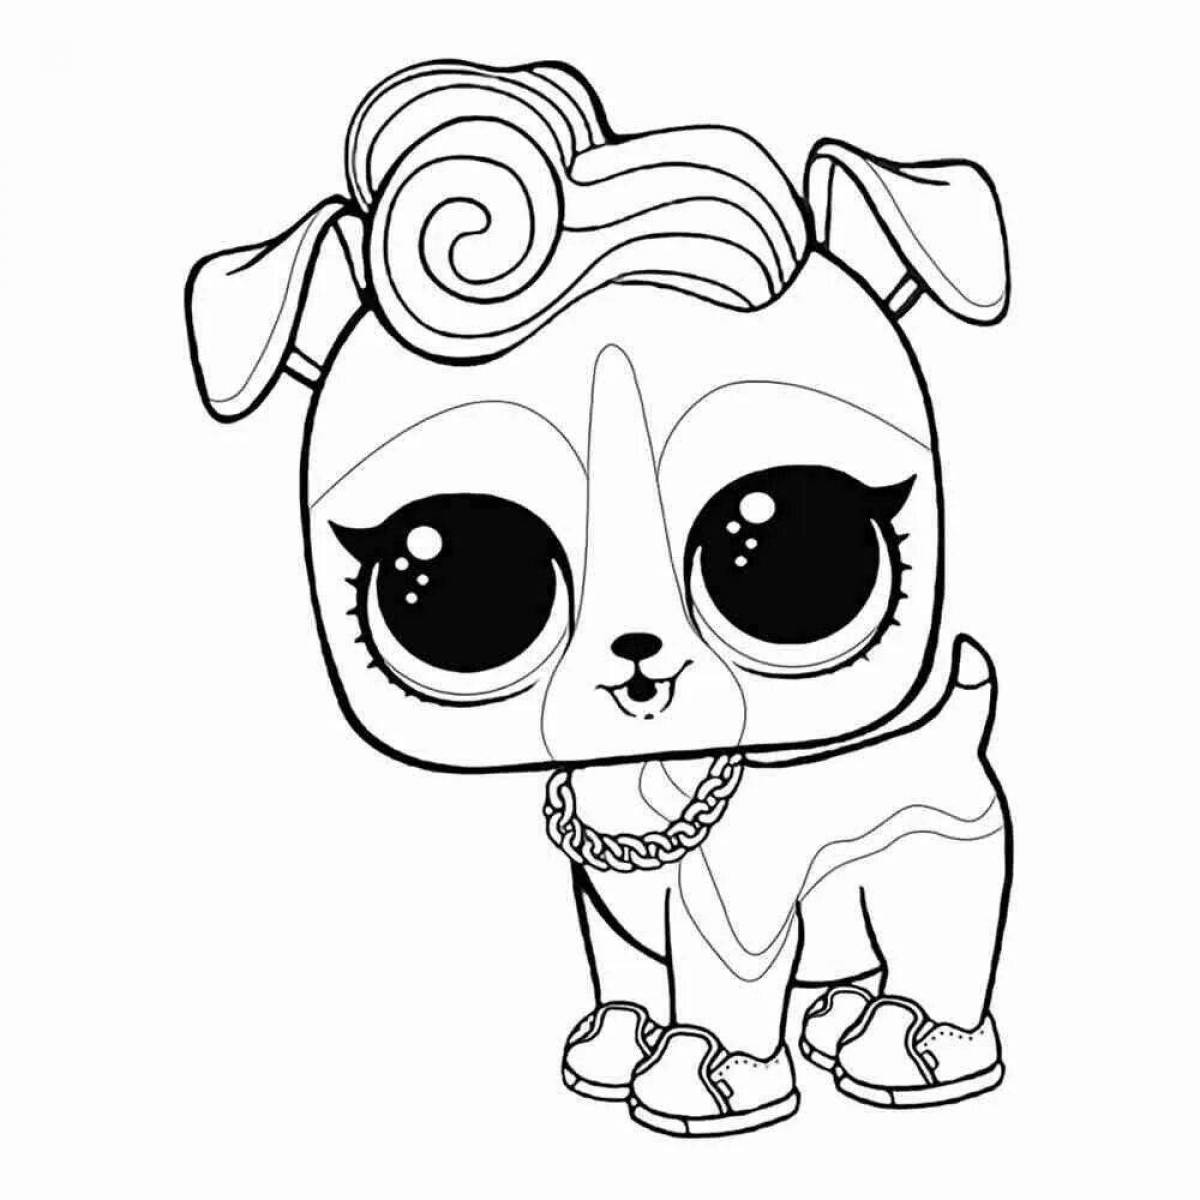 Cute lol animal coloring pages